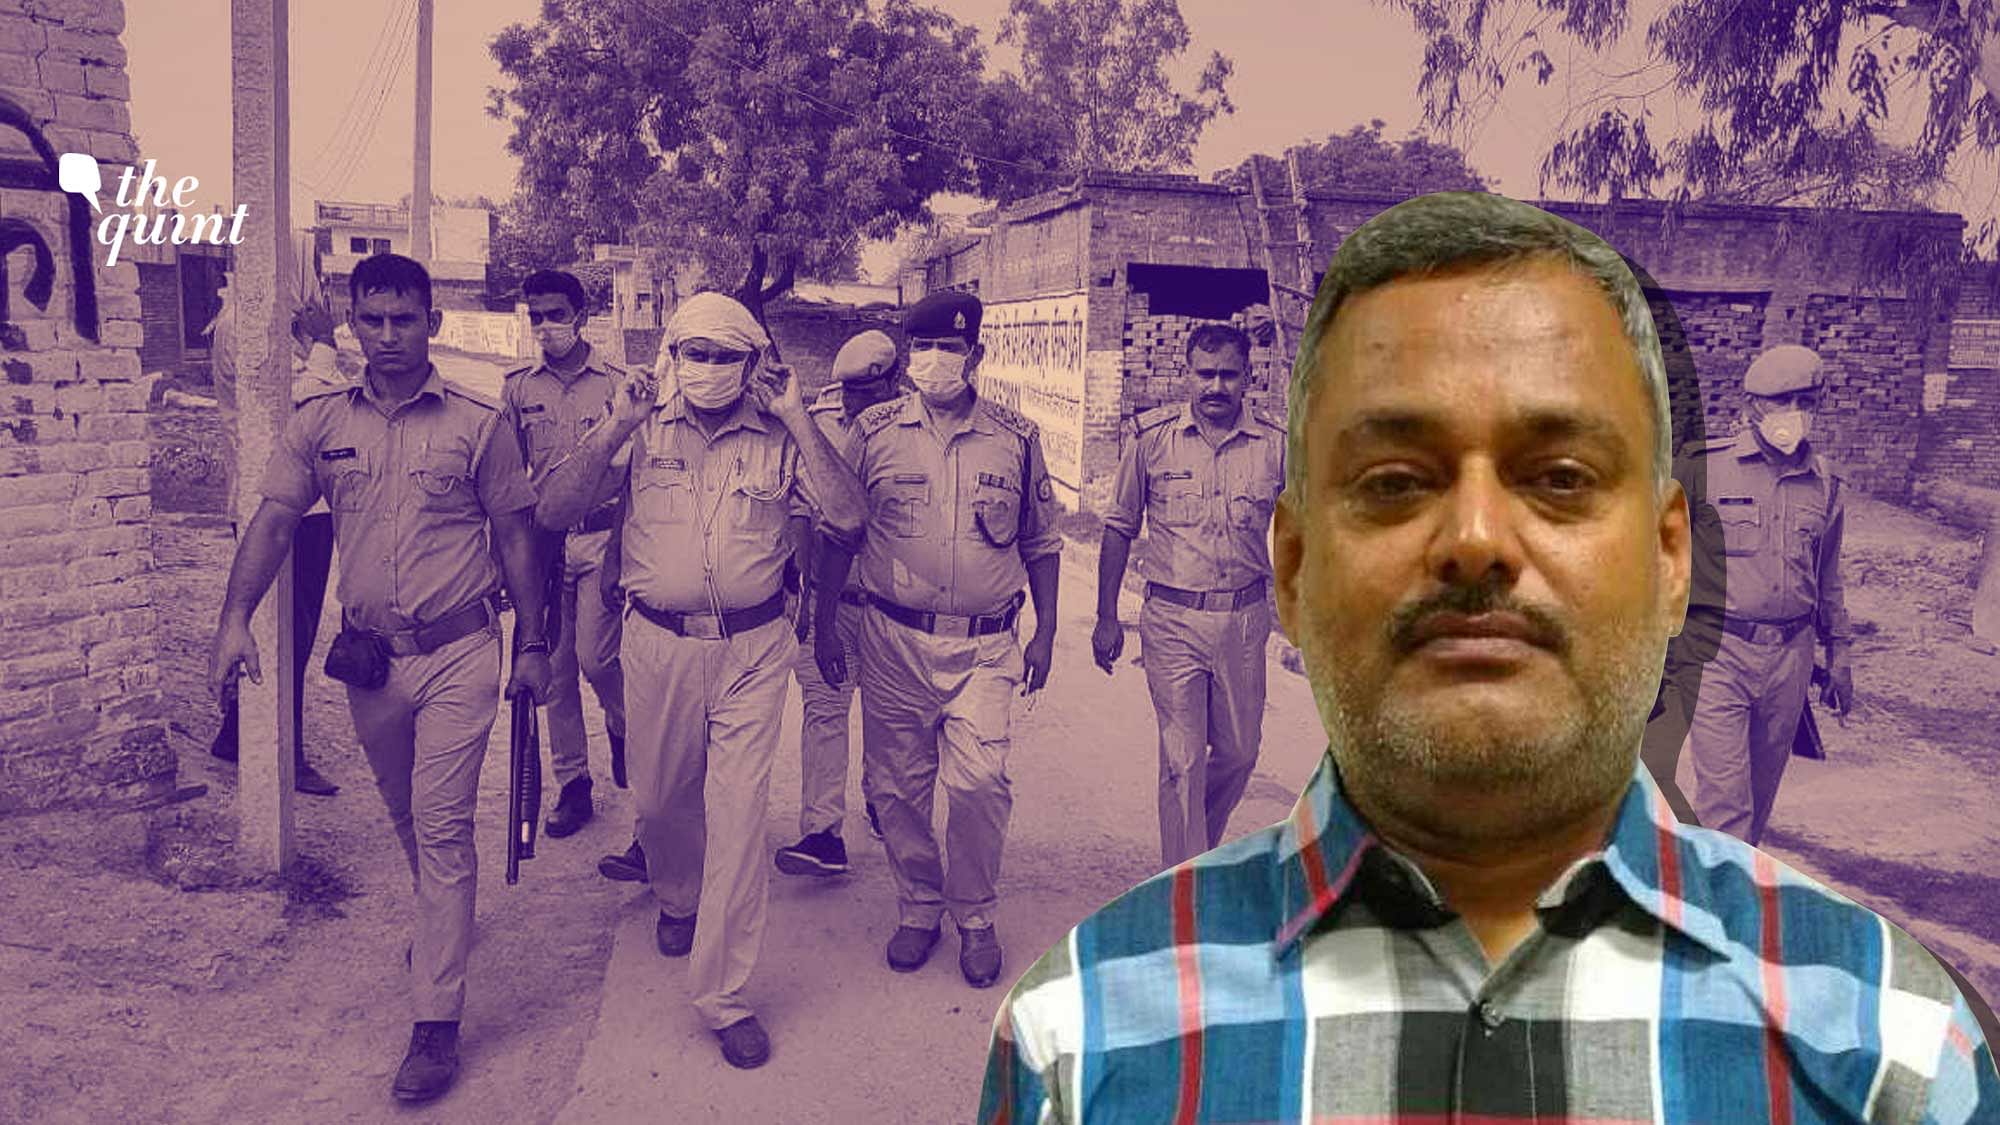 Eight UP police officers were killed in a shootout in Kanpur recently.